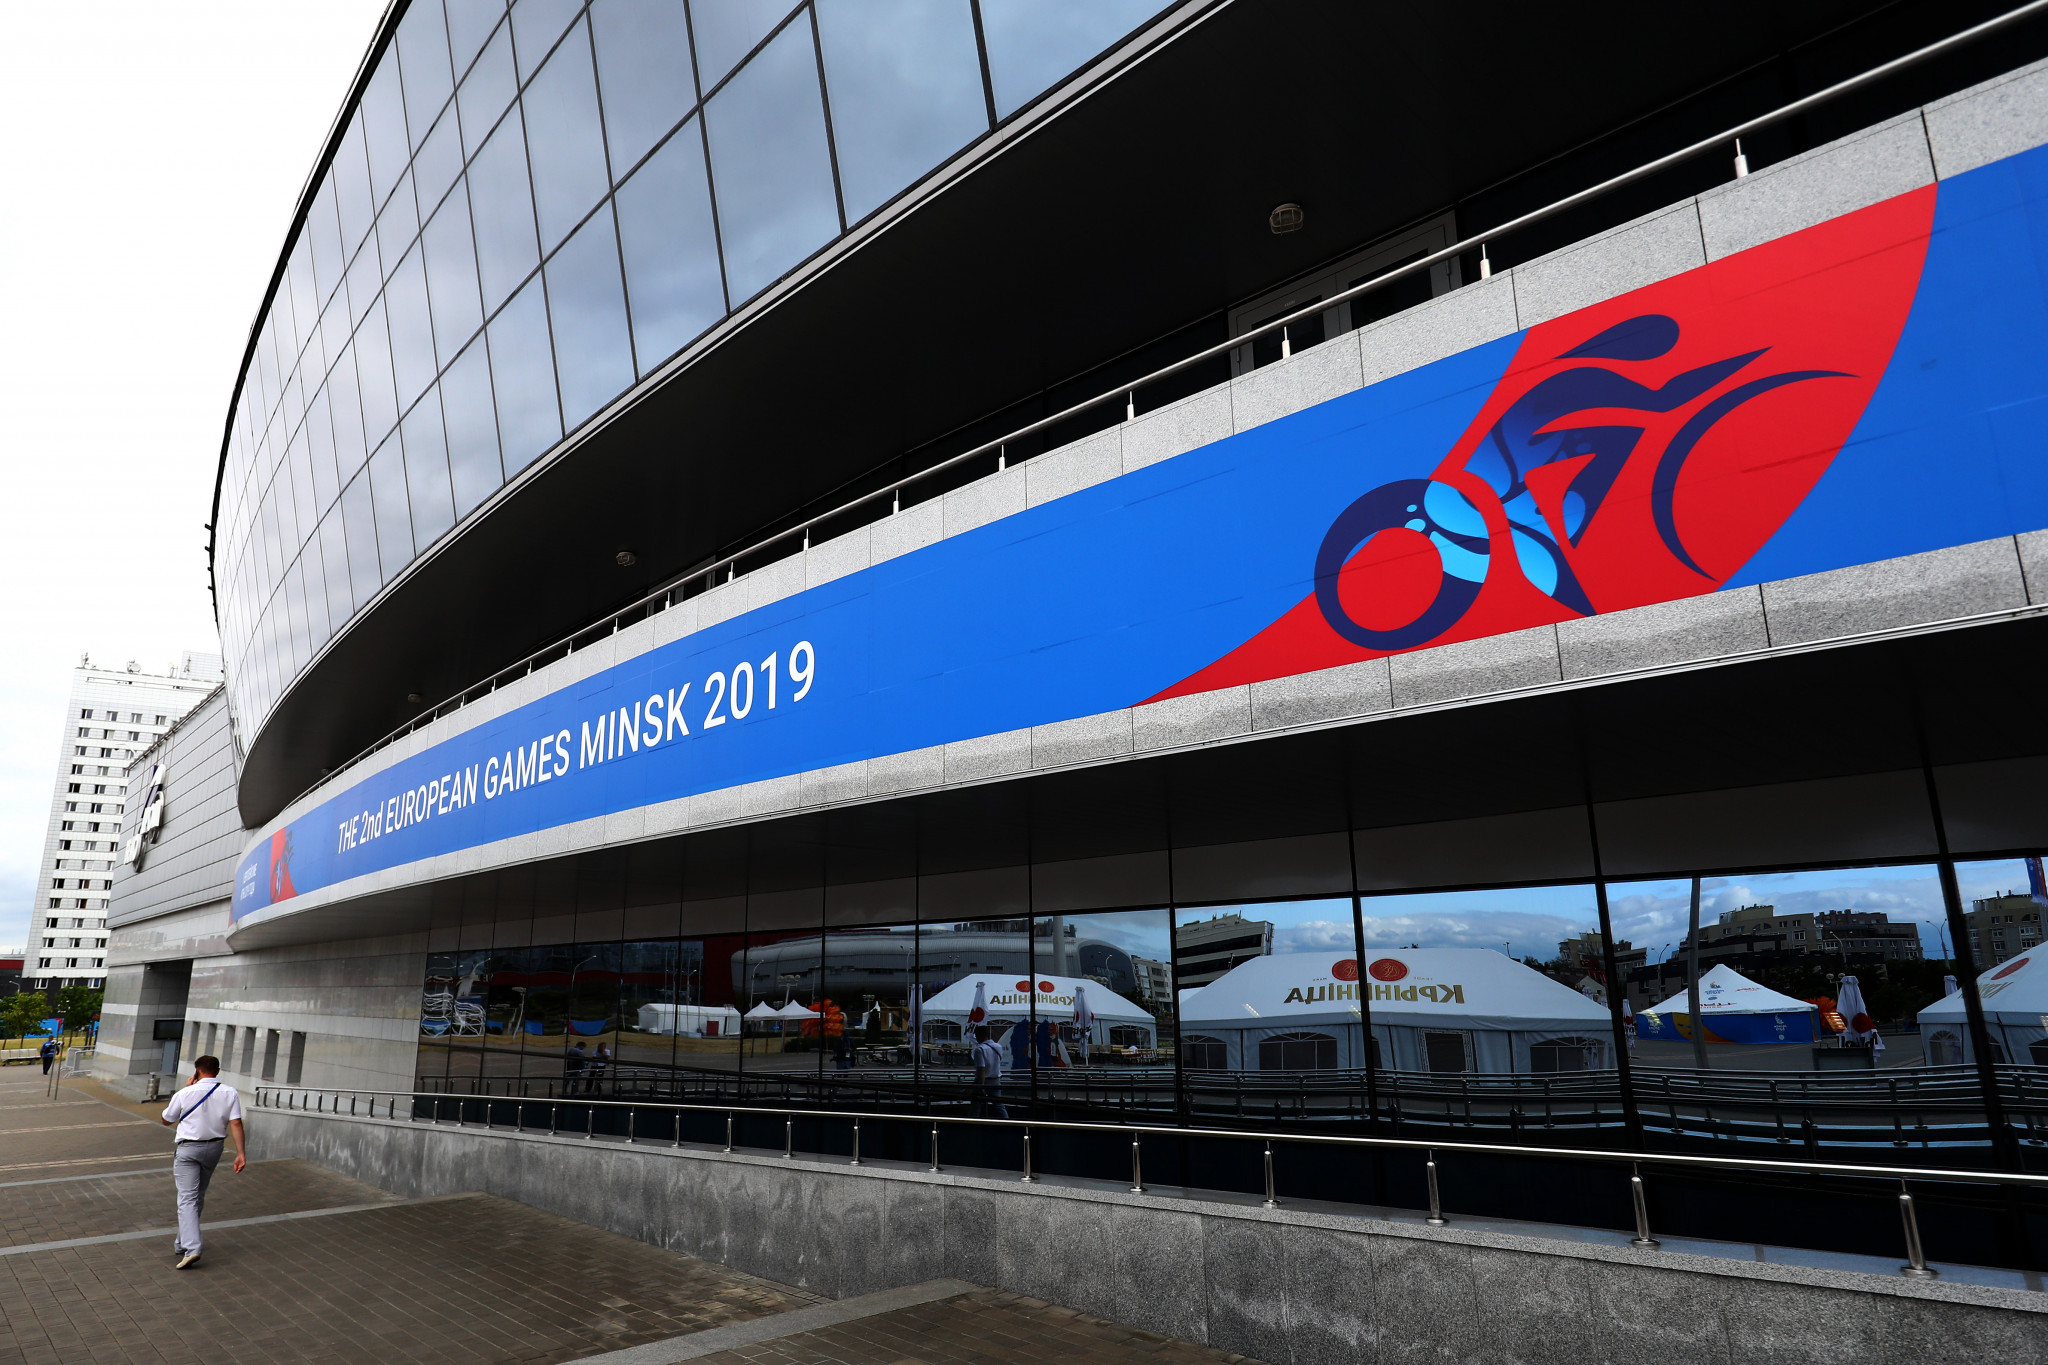 UEC reportedly declined Danish offer to host European Track Championships with event staying in Minsk